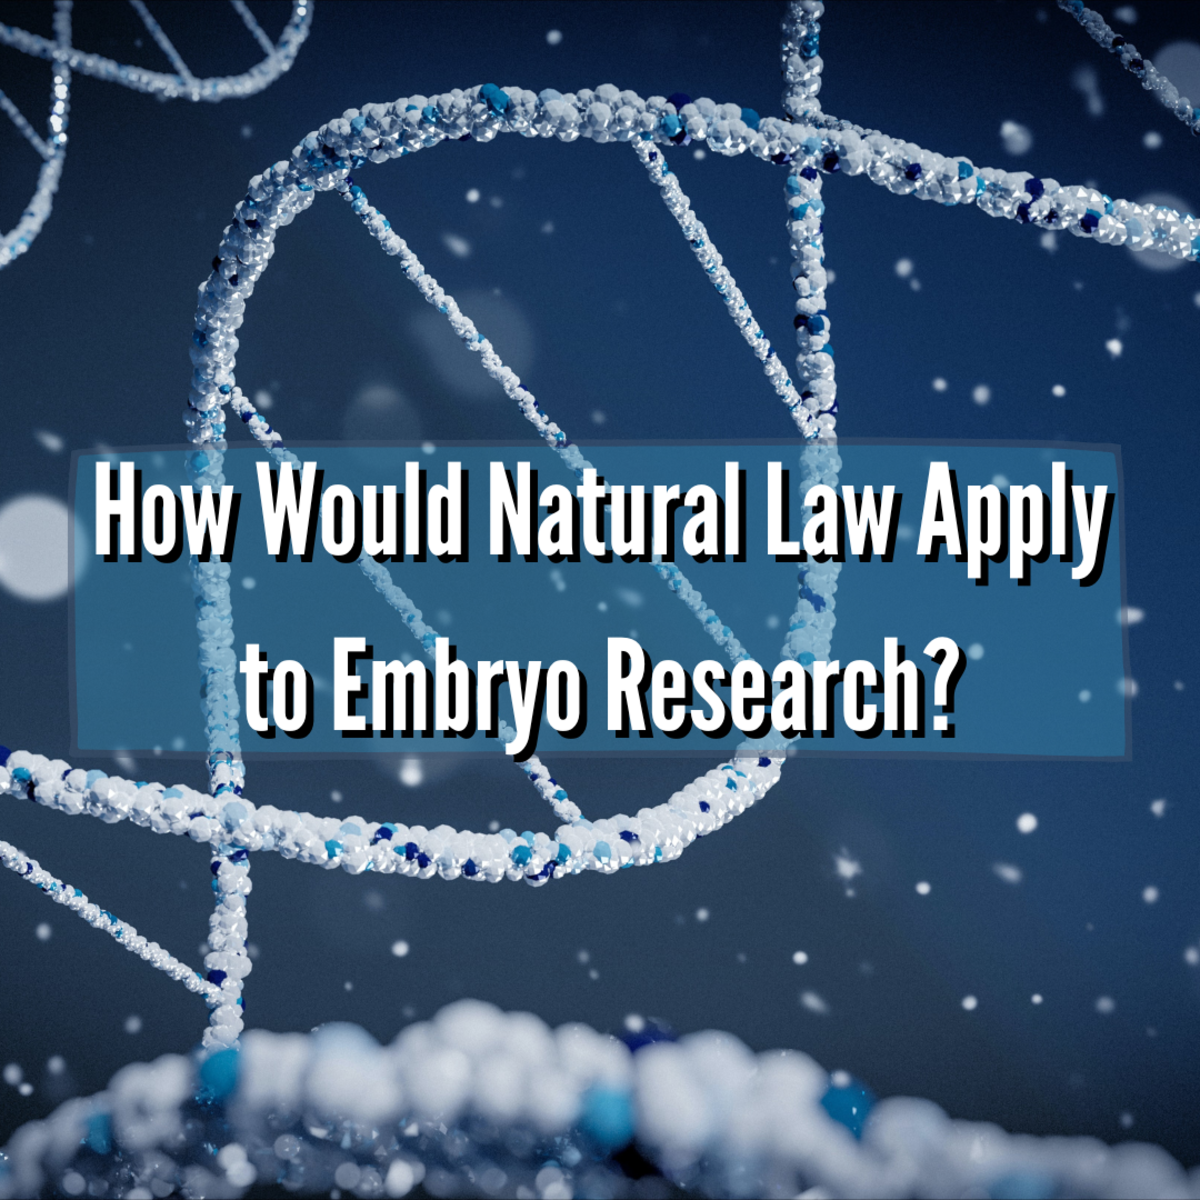 How Would Natural Law Apply to Embryo Research?